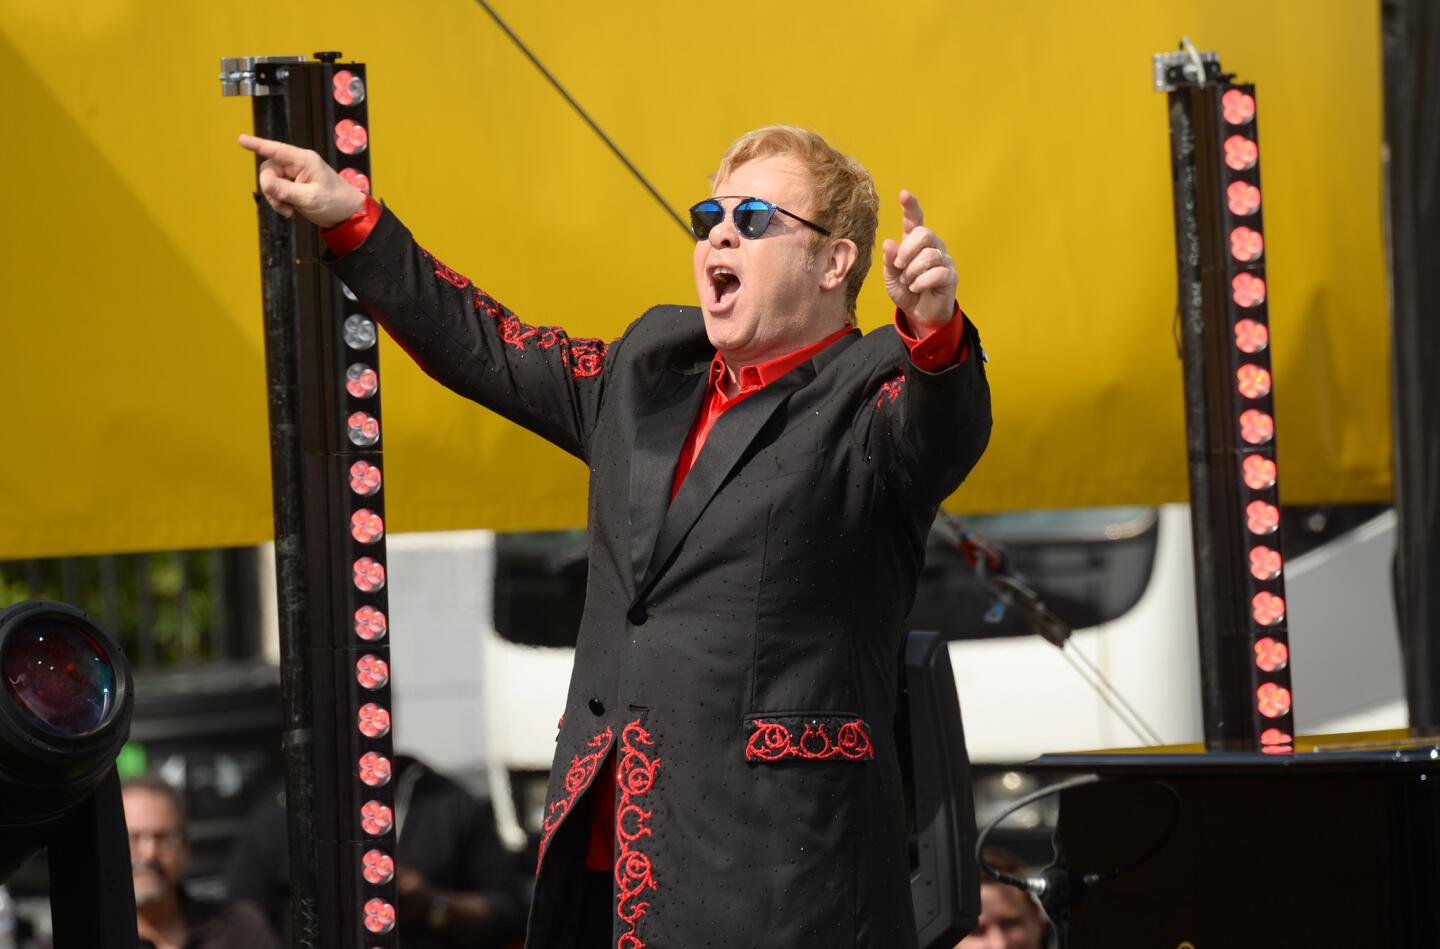 Elton John performs on the Sunset Strip, co-presented by AOL BUILD and BBVA Compass, on Feb. 27 in West Hollywood.